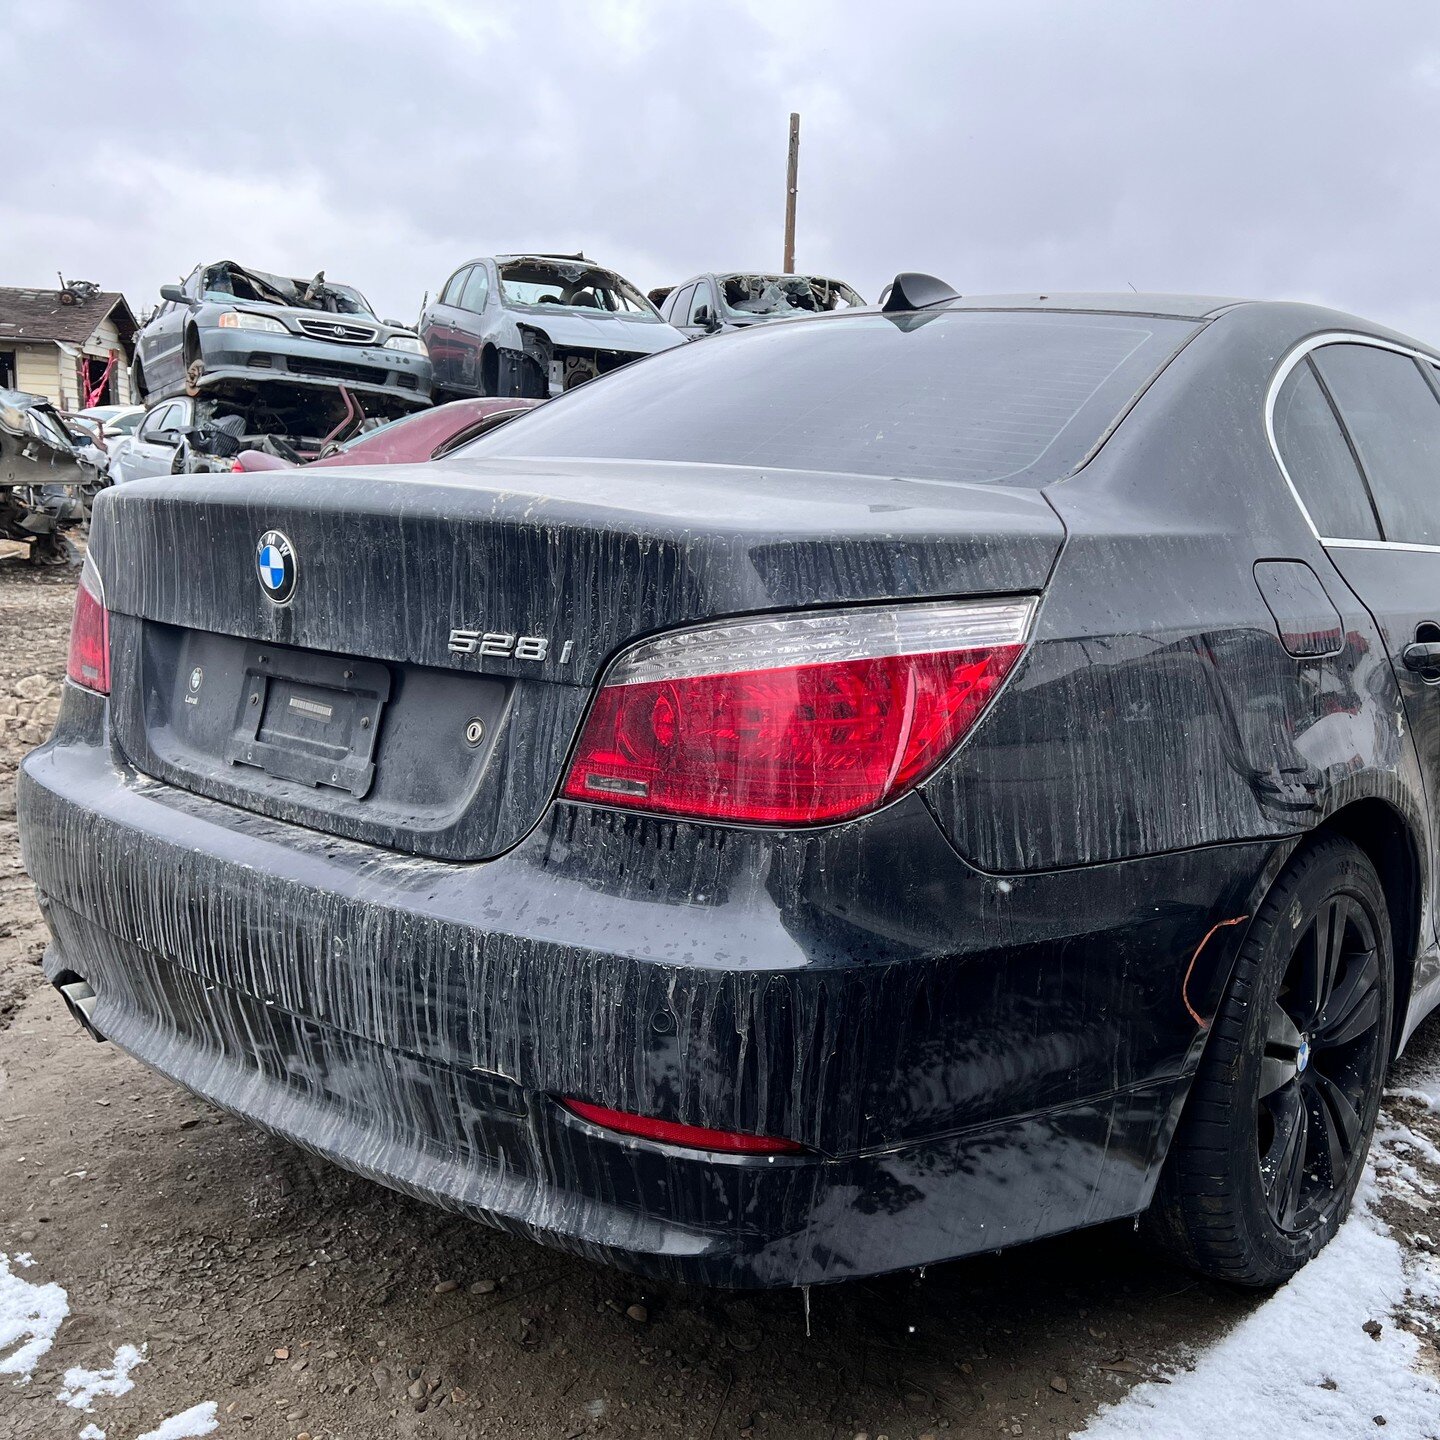 2010 BMW 528XI 3L *FOR PARTS* - 4WD, 6 SPEED AUTOMATIC TRANSMISSION, 6 CYCLINDER , BLACK (475), KMS:999, VIN:WBANV1C55AC159159

We offer contactless delivery and are more than willing to accommodate your needs.
Why pick your part when we pull it for 